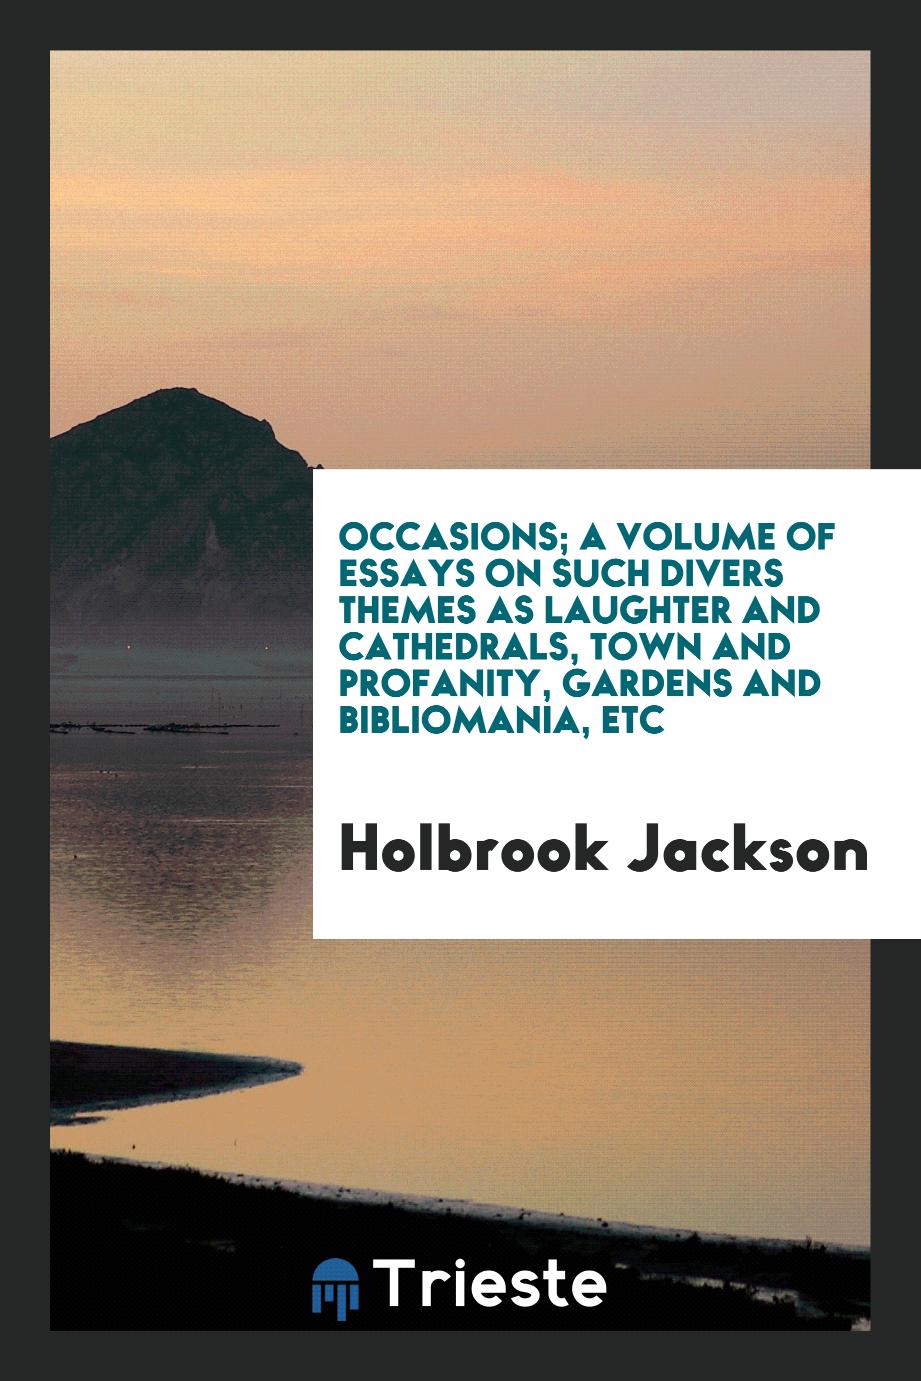 Occasions; a volume of essays on such divers themes as laughter and cathedrals, town and profanity, gardens and bibliomania, etc